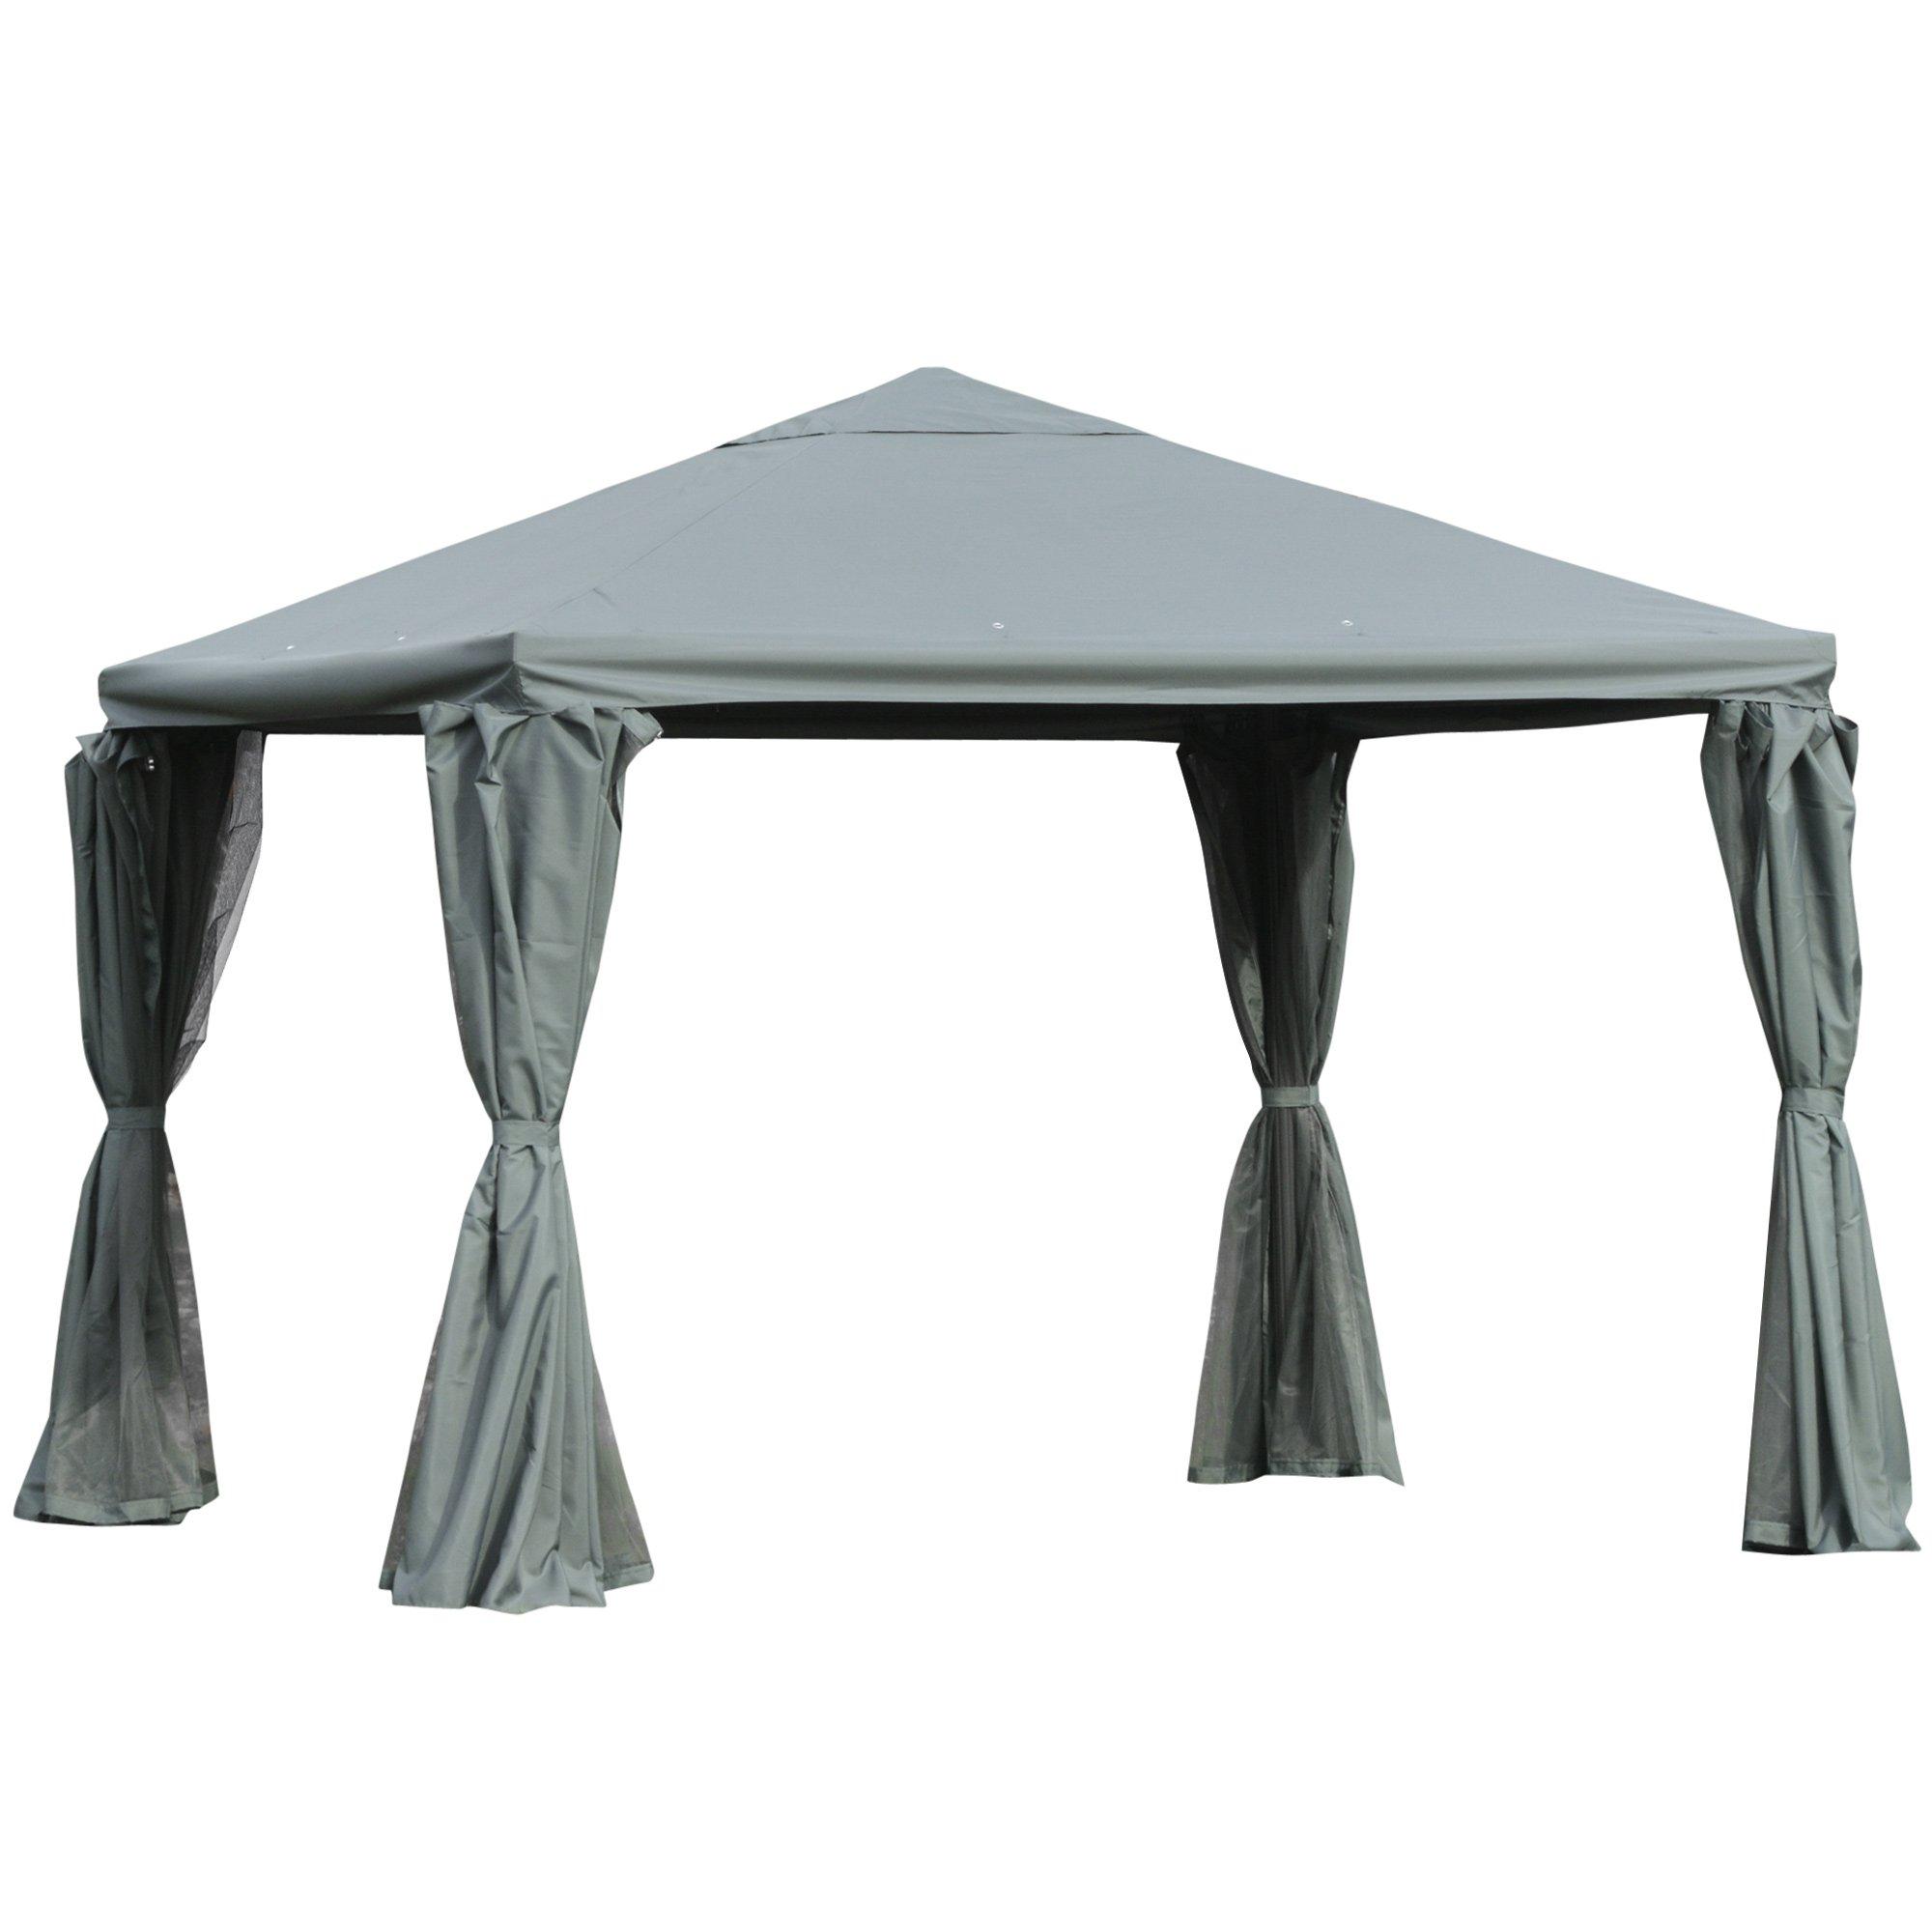 Outsunny  3(m) Outdoor Gazebo Canopy Party Tent Aluminum Frame W/ Walls